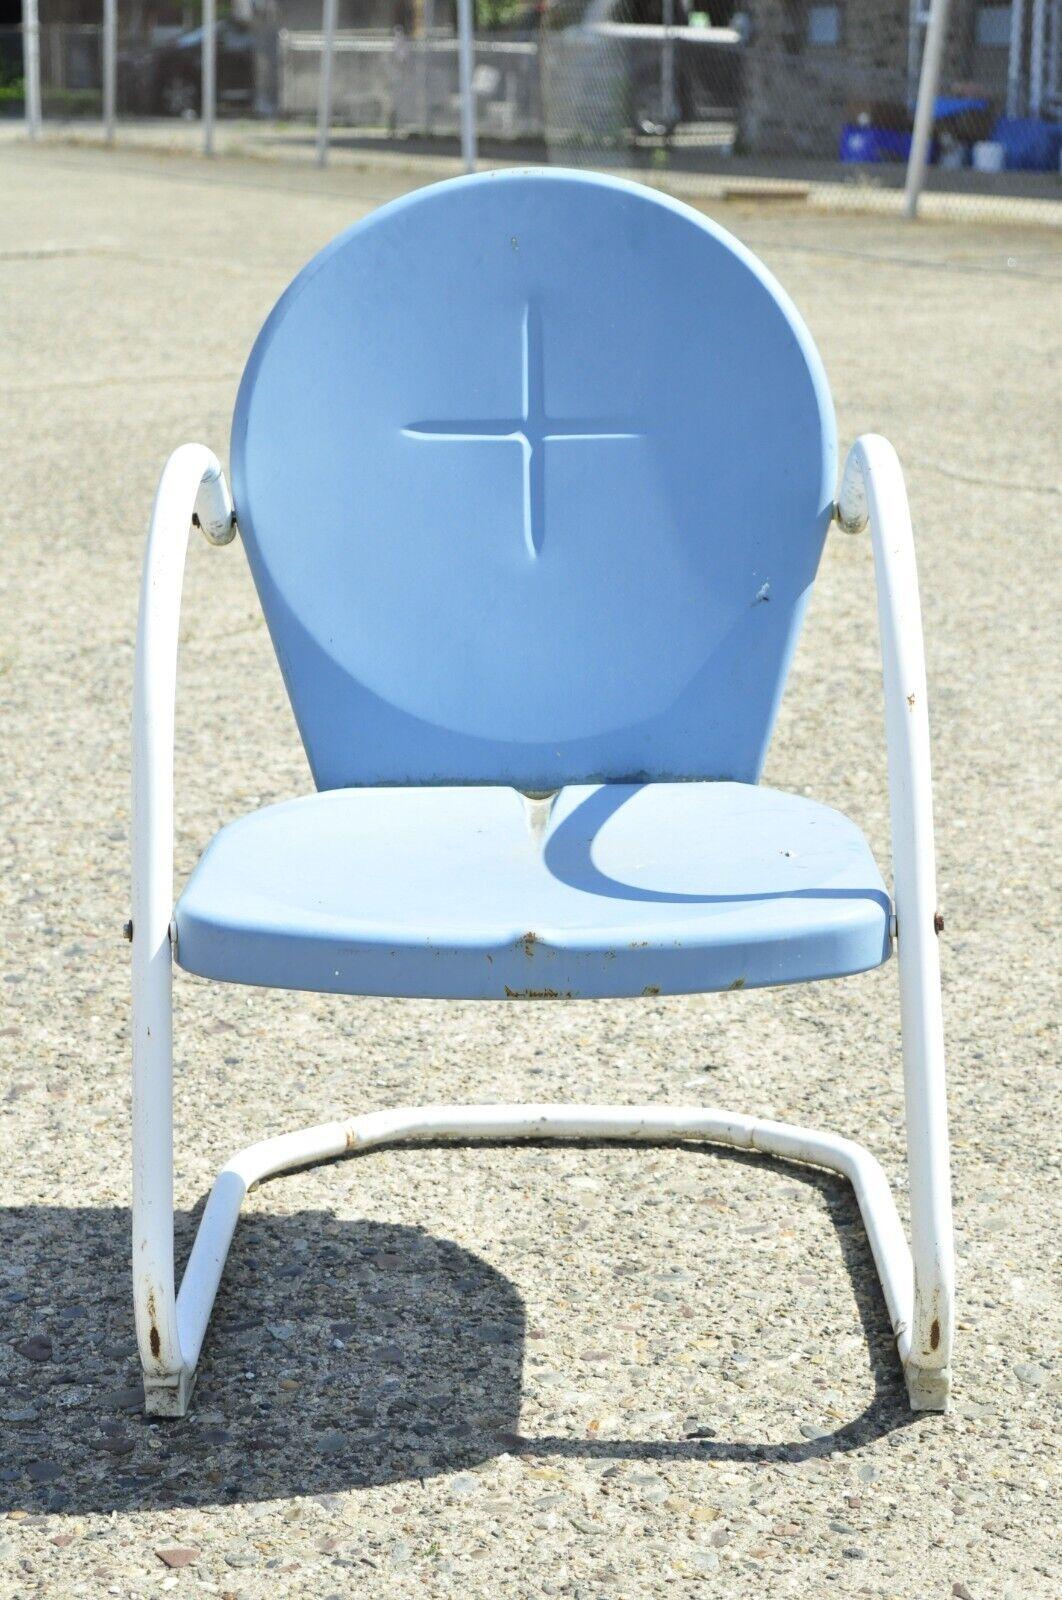 Antique Vintage Art Deco steel metal blue garden patio outdoor chair. Item features blue painted finish, round back, very nice vintage item, sleek sculptural form. Circa early to mid 1900s. Measurements: 33.5